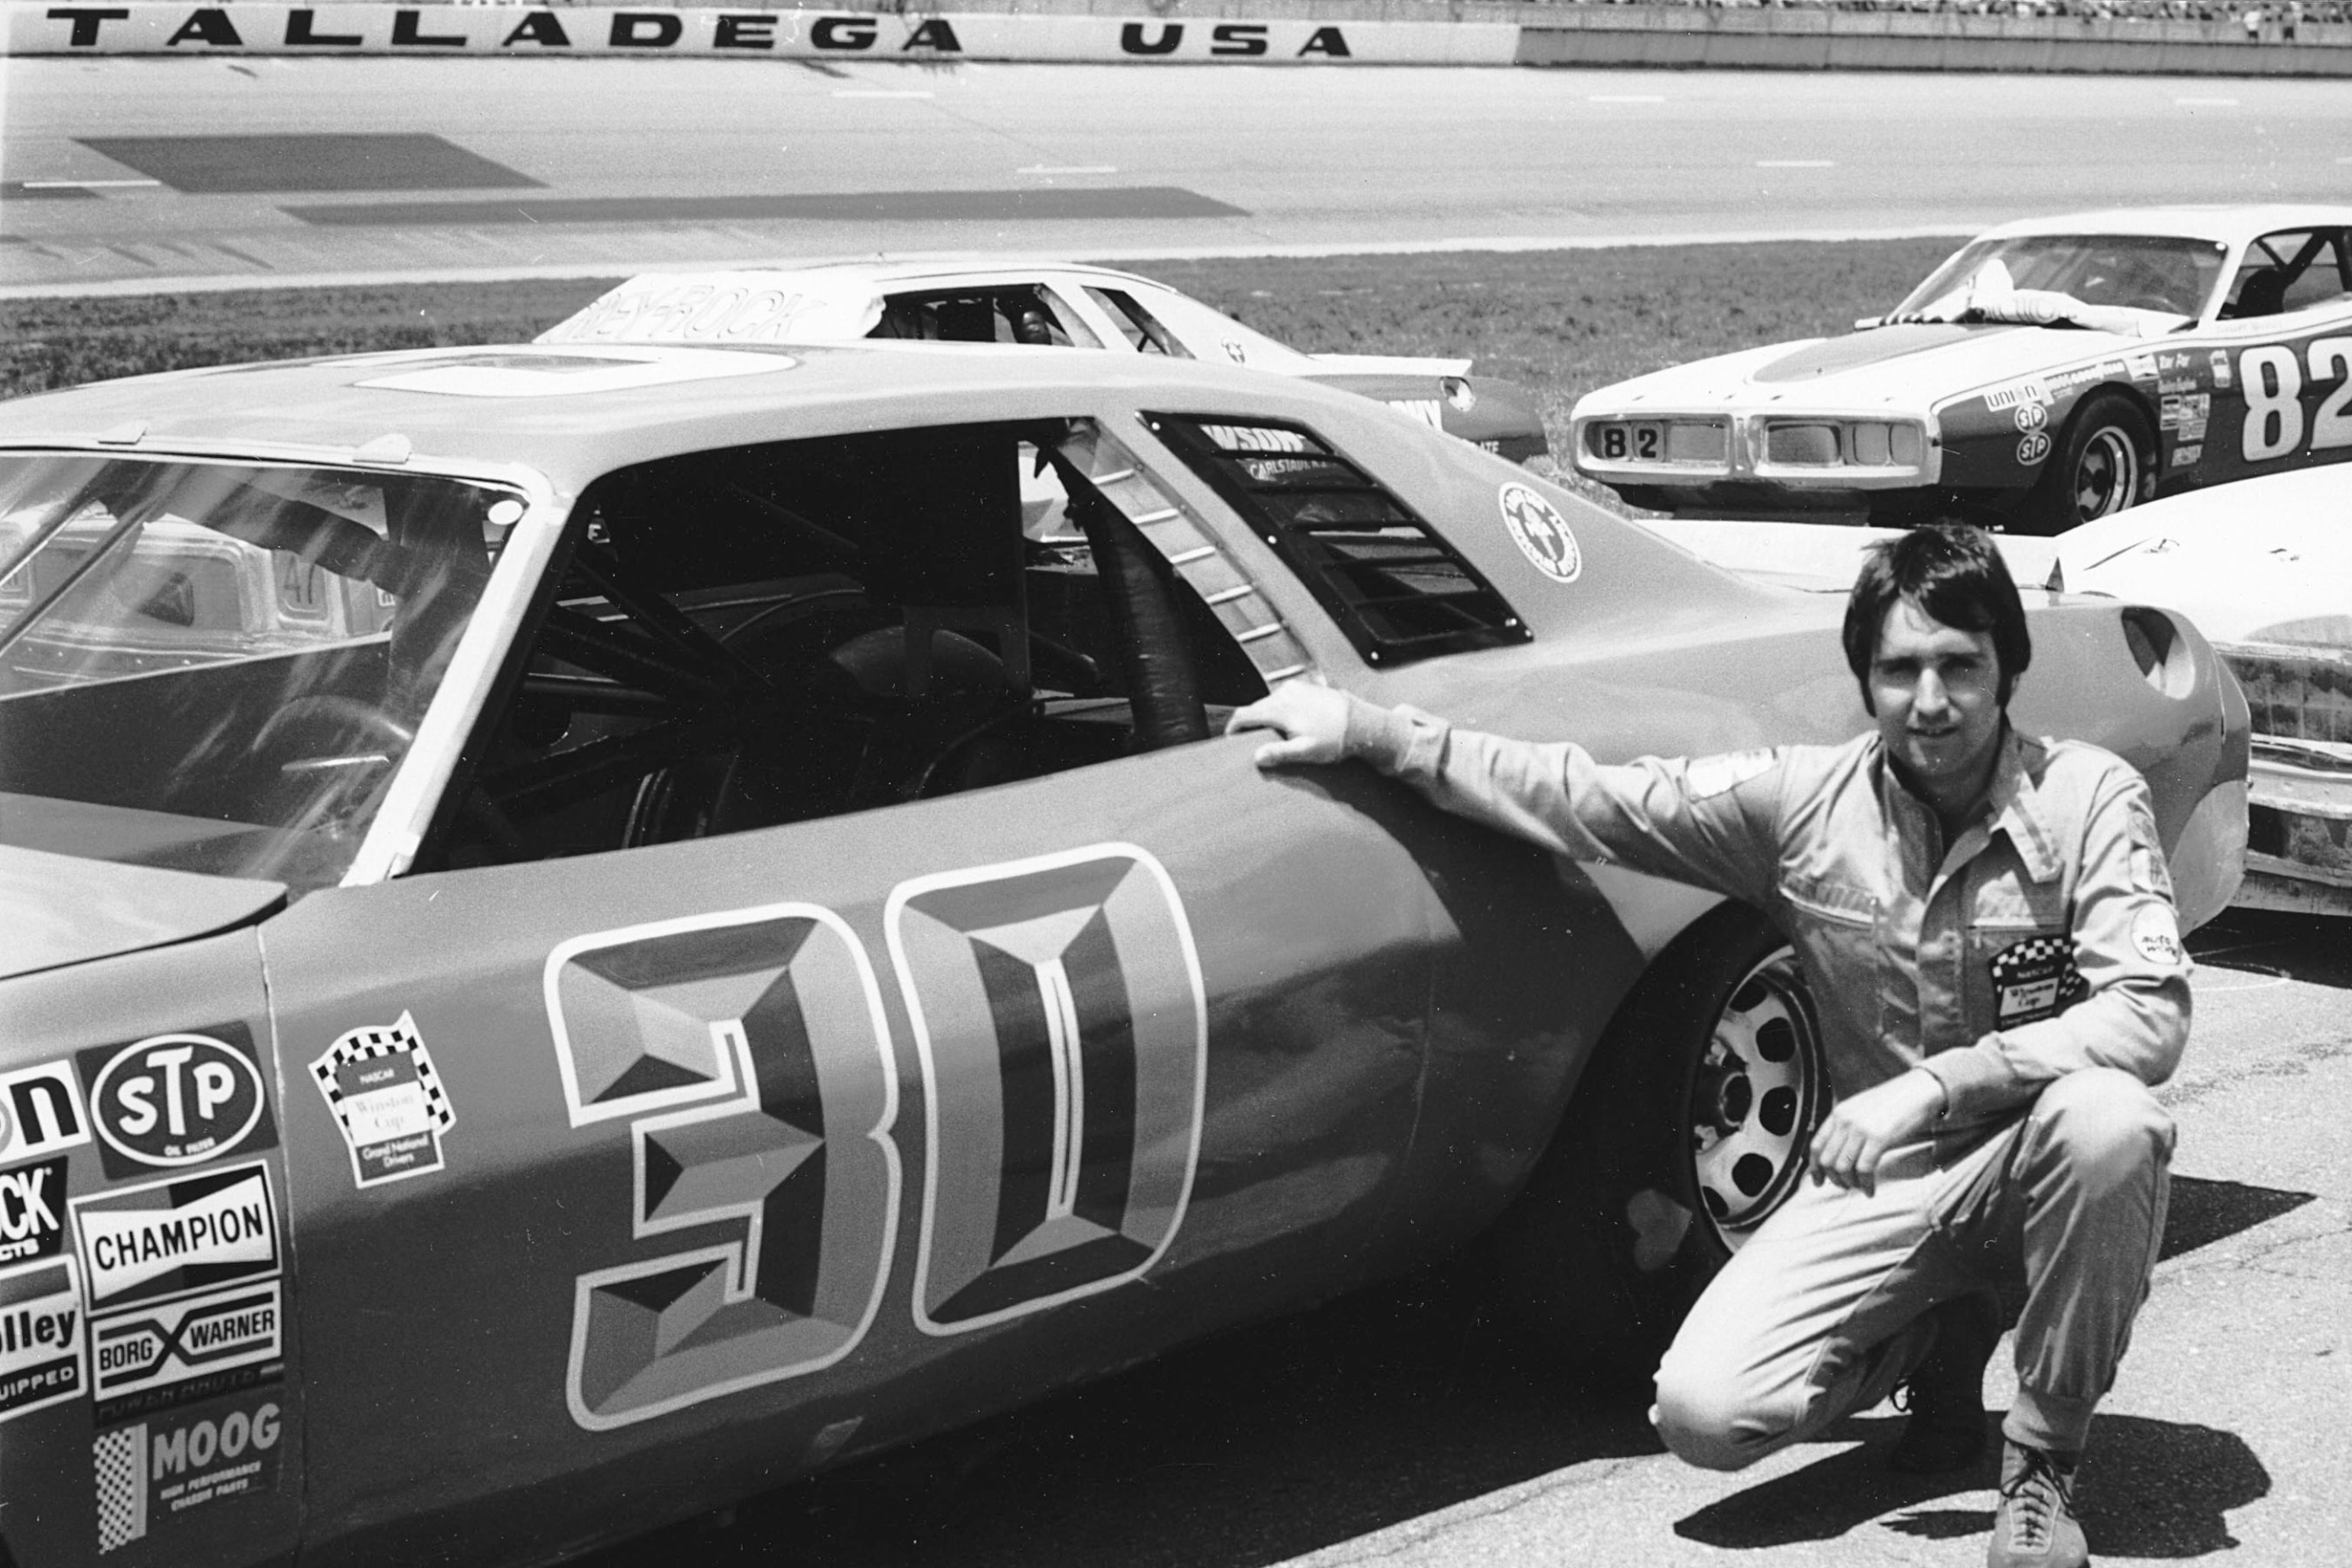 PHOTO: Tighe Scott of Pen Argyle, PA, made his NASCAR Cup debut at Talladega Super speedway driving this Chevrolet for car owner Walter Ballard in the Winston 500, finishing in 17th position, May 2 1976.